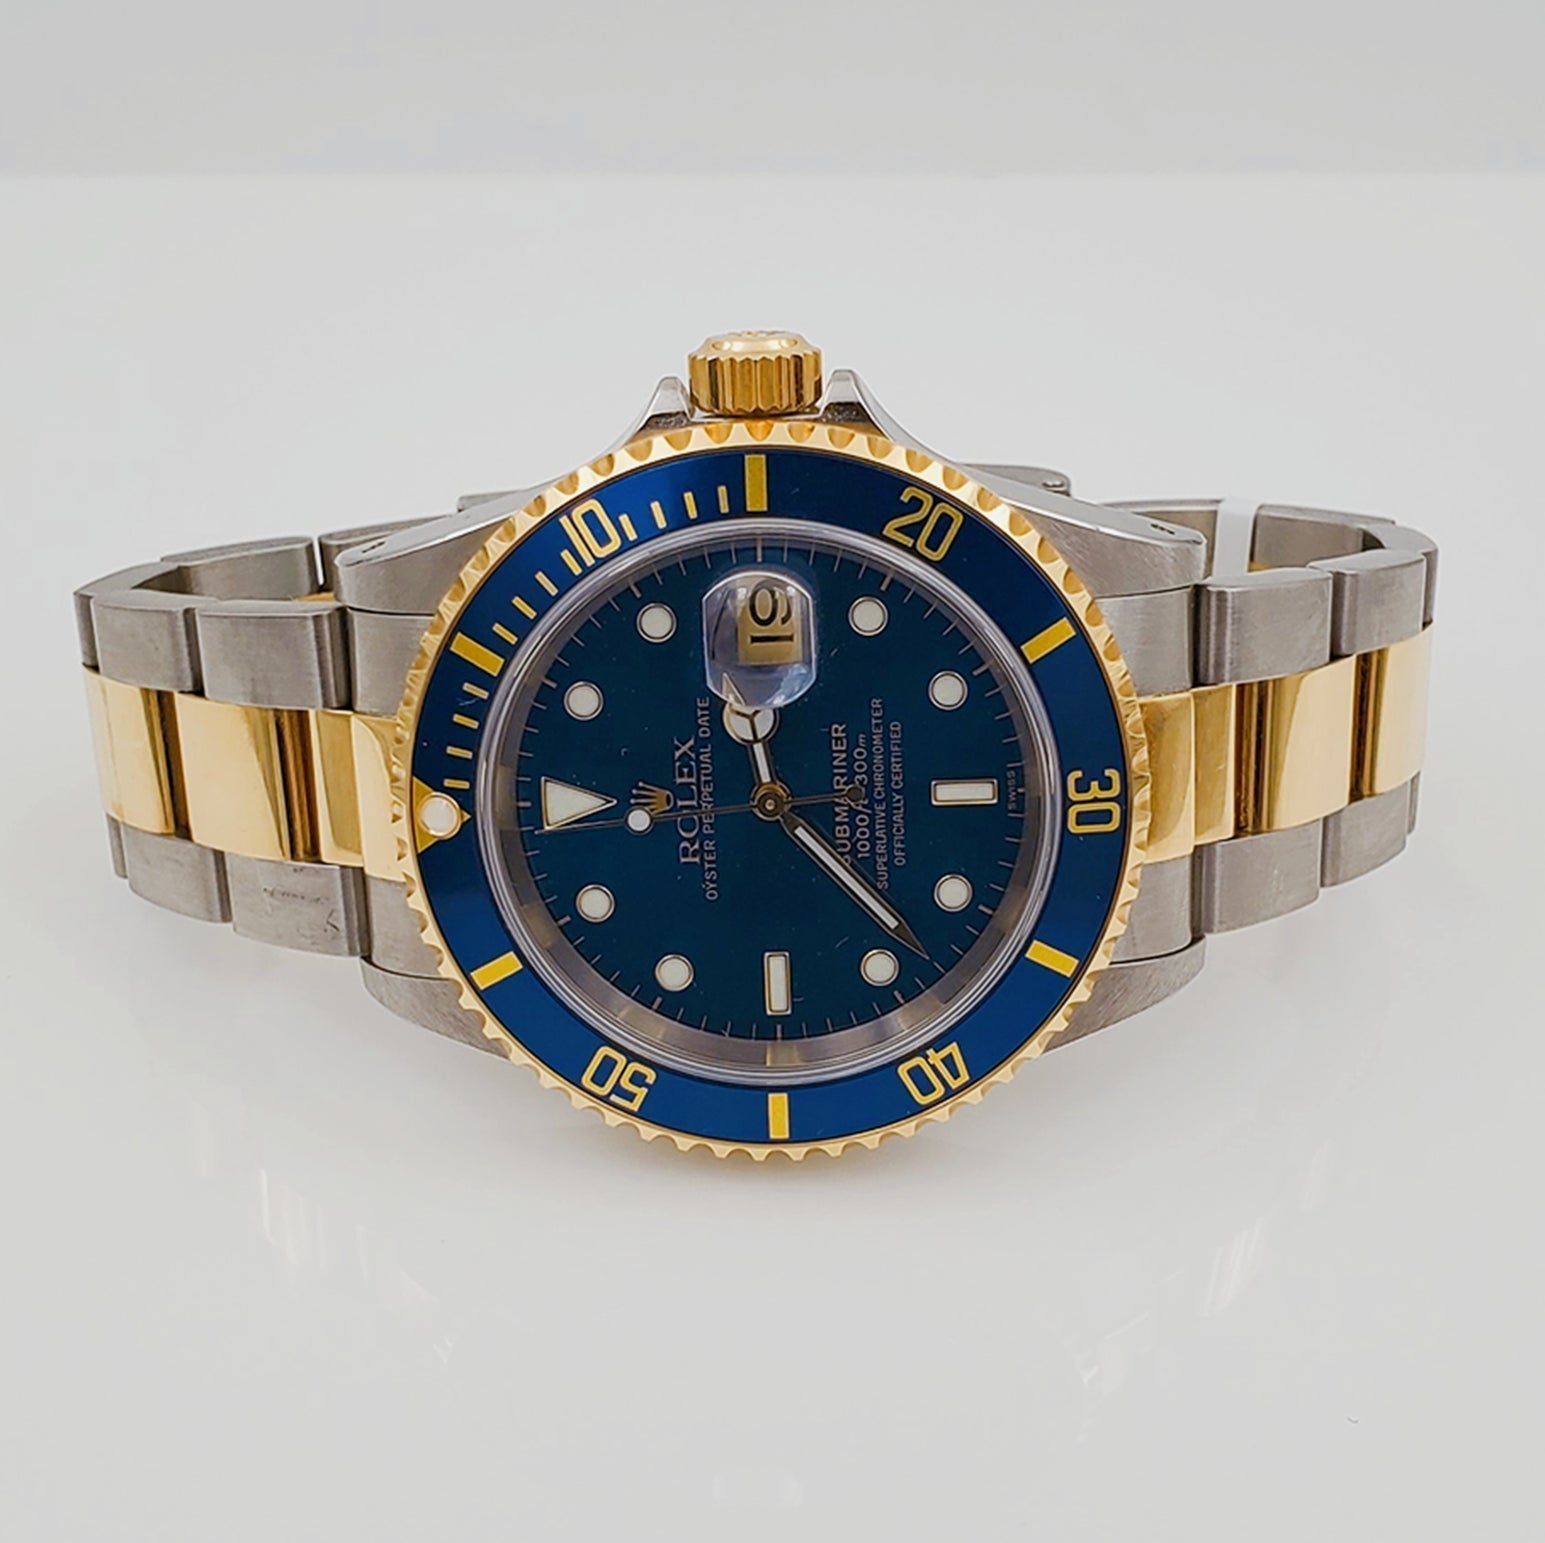 2003 Men's Rolex Submariner 40mm Two Tone Oyster Perpetual 18K Yellow Gold / Stainless Steel Watch with Blue Dial and Blue Bezel. (Pre-Owned 16613)